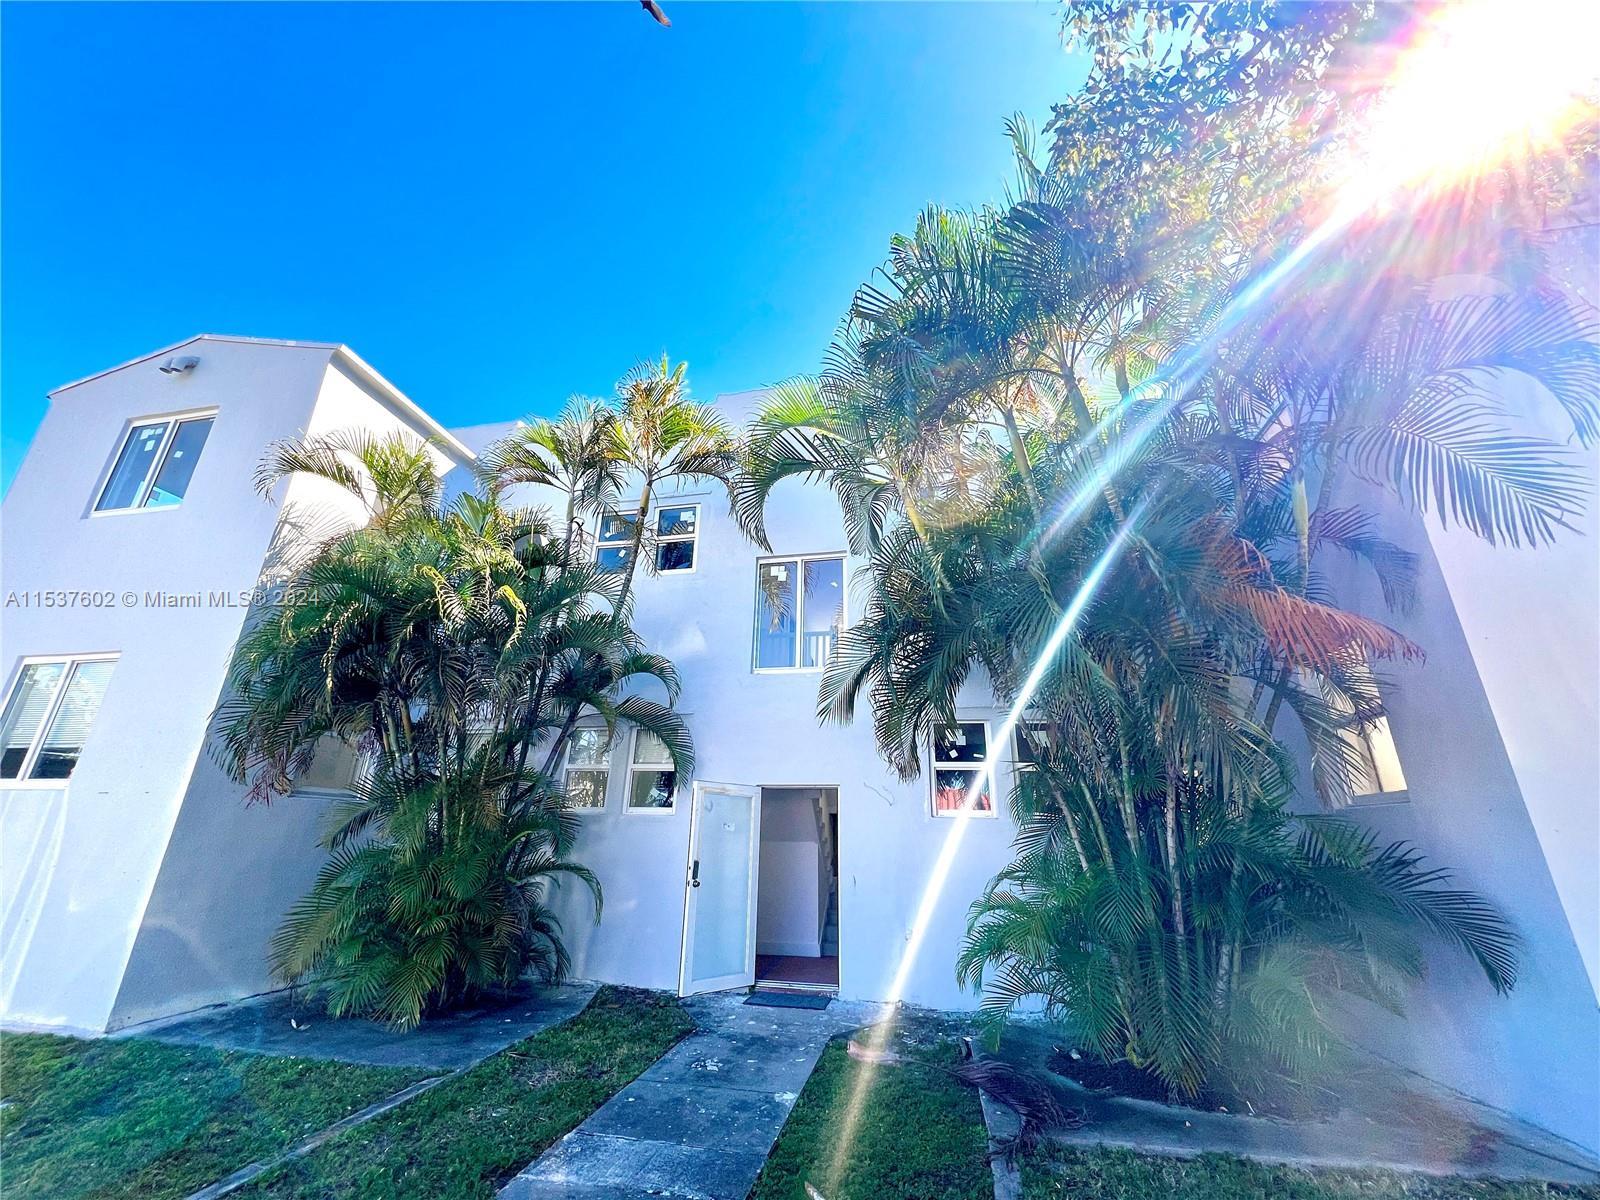 Photo of 1015 S 17th Ave #1 in Hollywood, FL